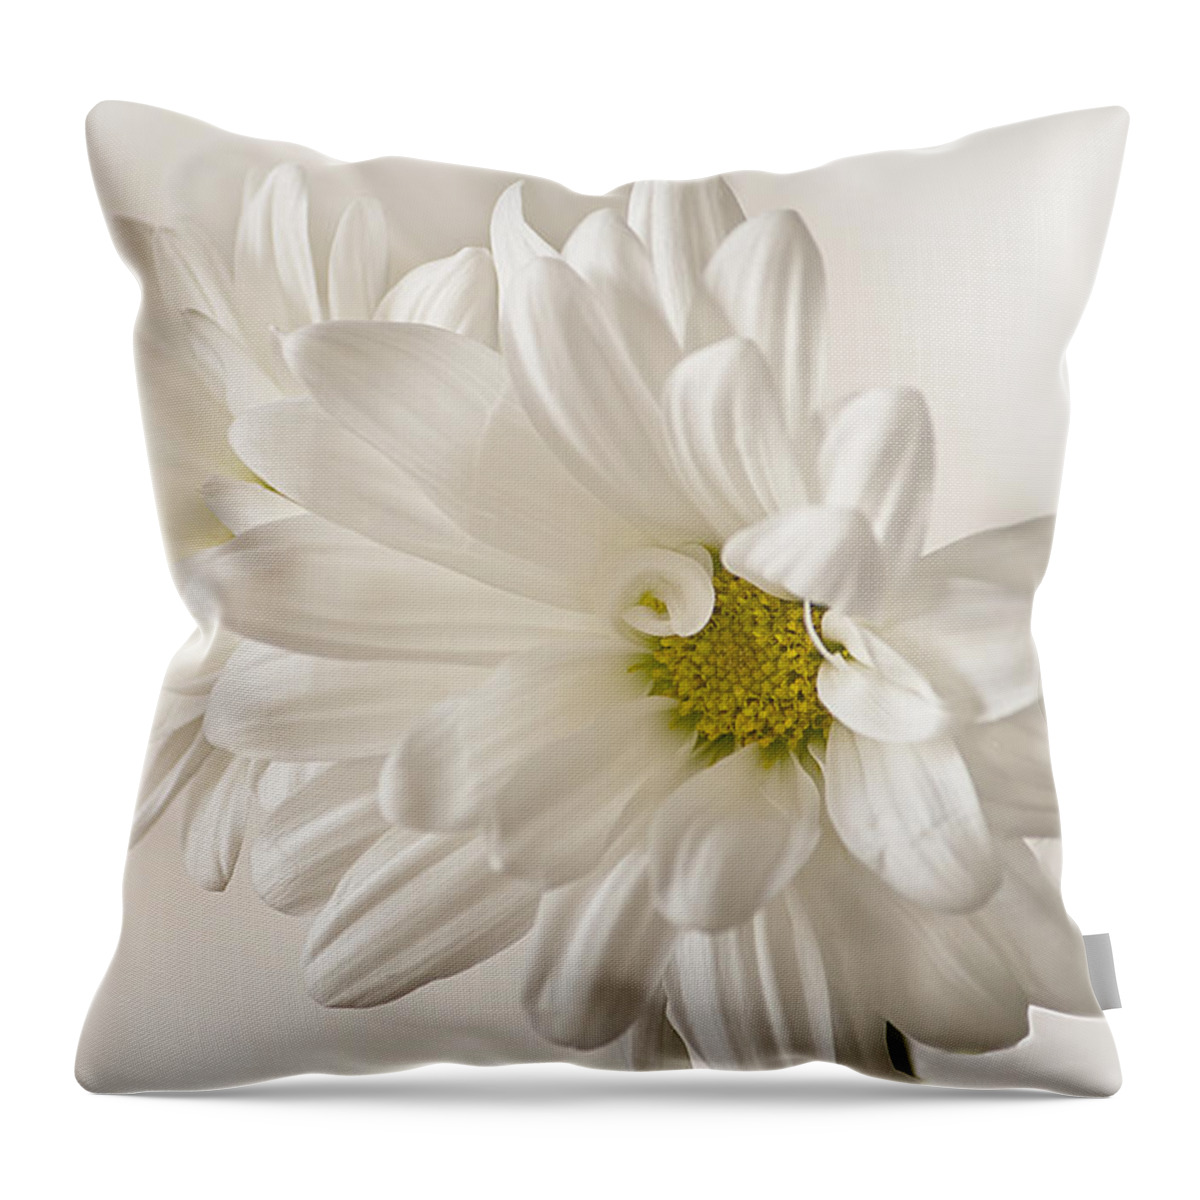 Daisy Throw Pillow featuring the photograph White Daisies by Cheryl Day